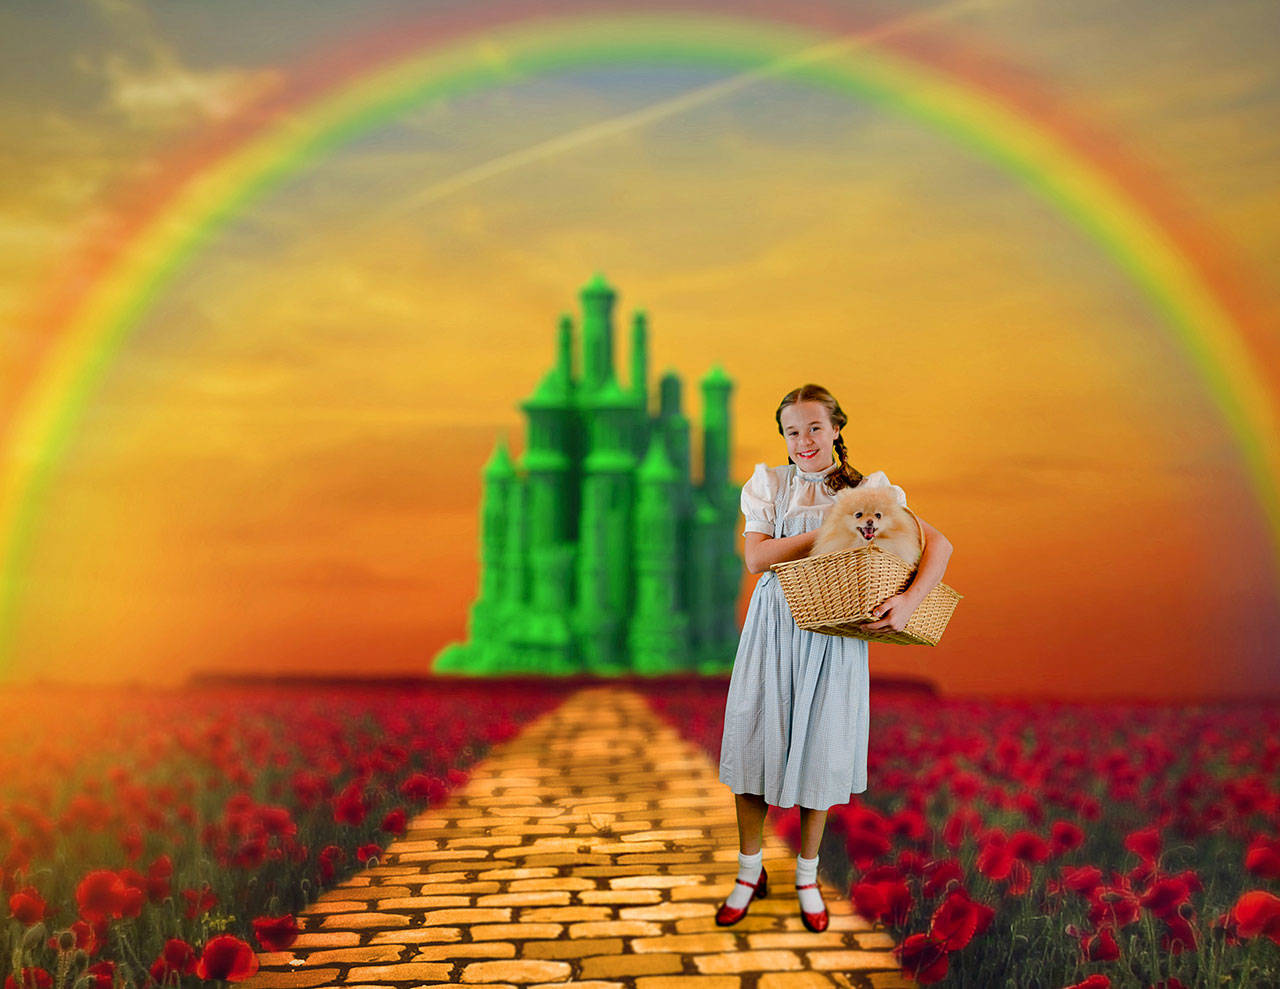 Bainbridge Performing Arts photo | Emily Fox, as Dorothy, leads a troup of newcomers and familiar faces alike in the Bainbridge Performing Arts’ production of “Wizard of Oz.”